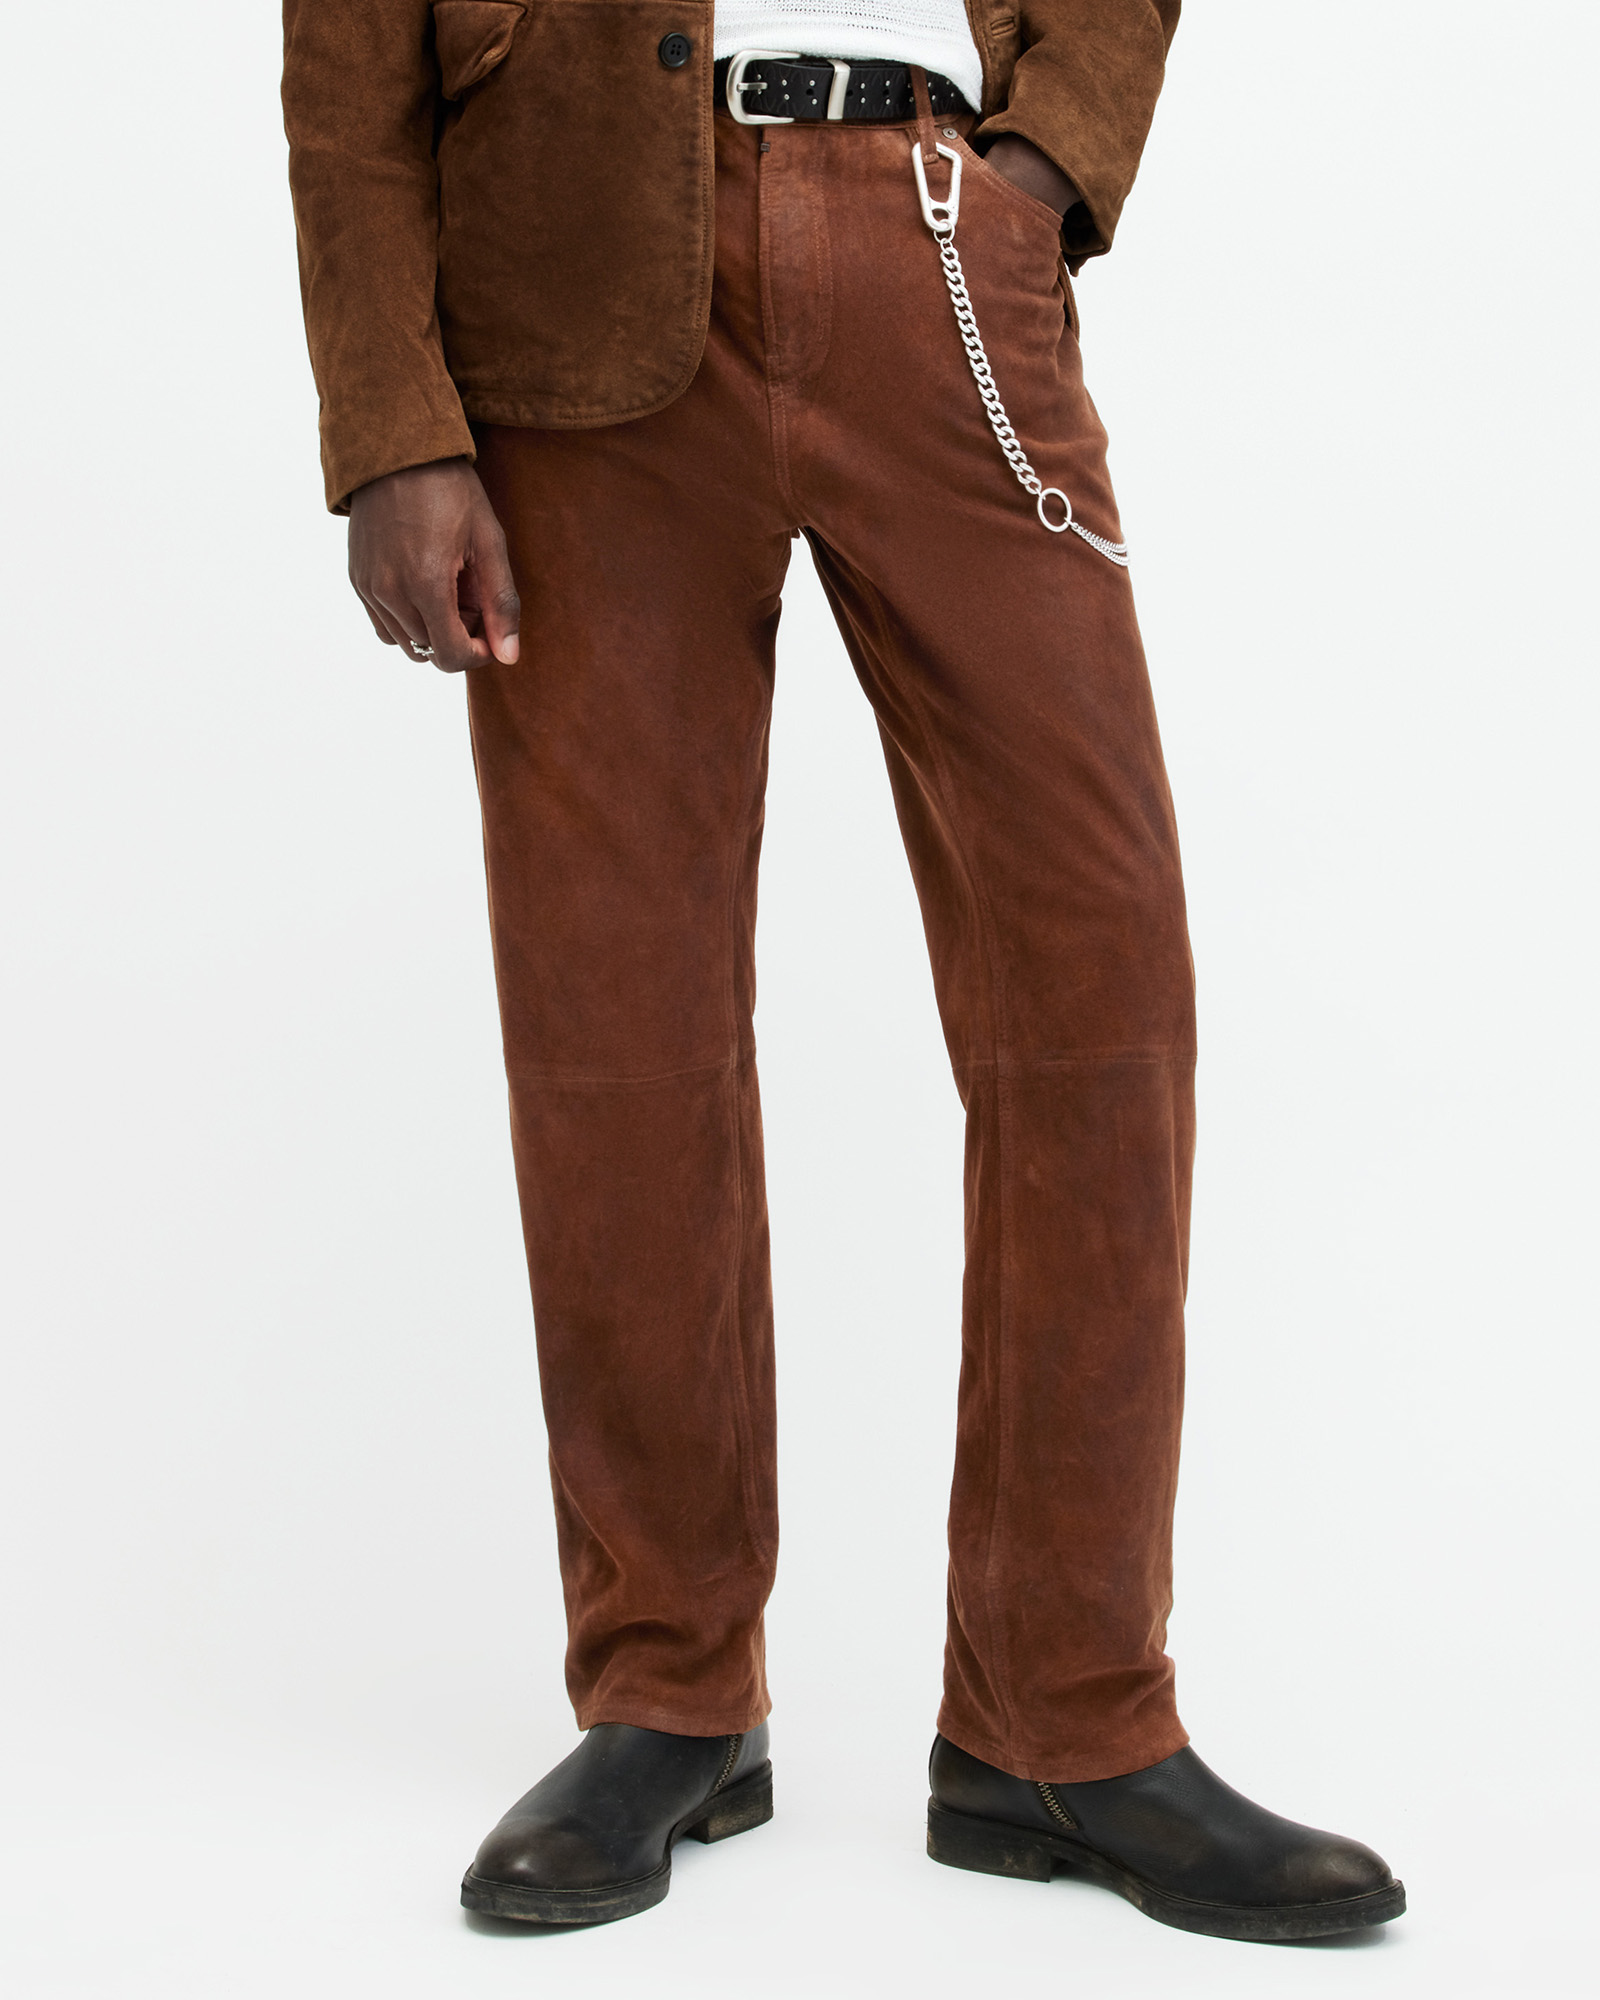 NEAT LAMB LEATHER TAPERED TROUSER Brownスラックス - ITECHCLASS